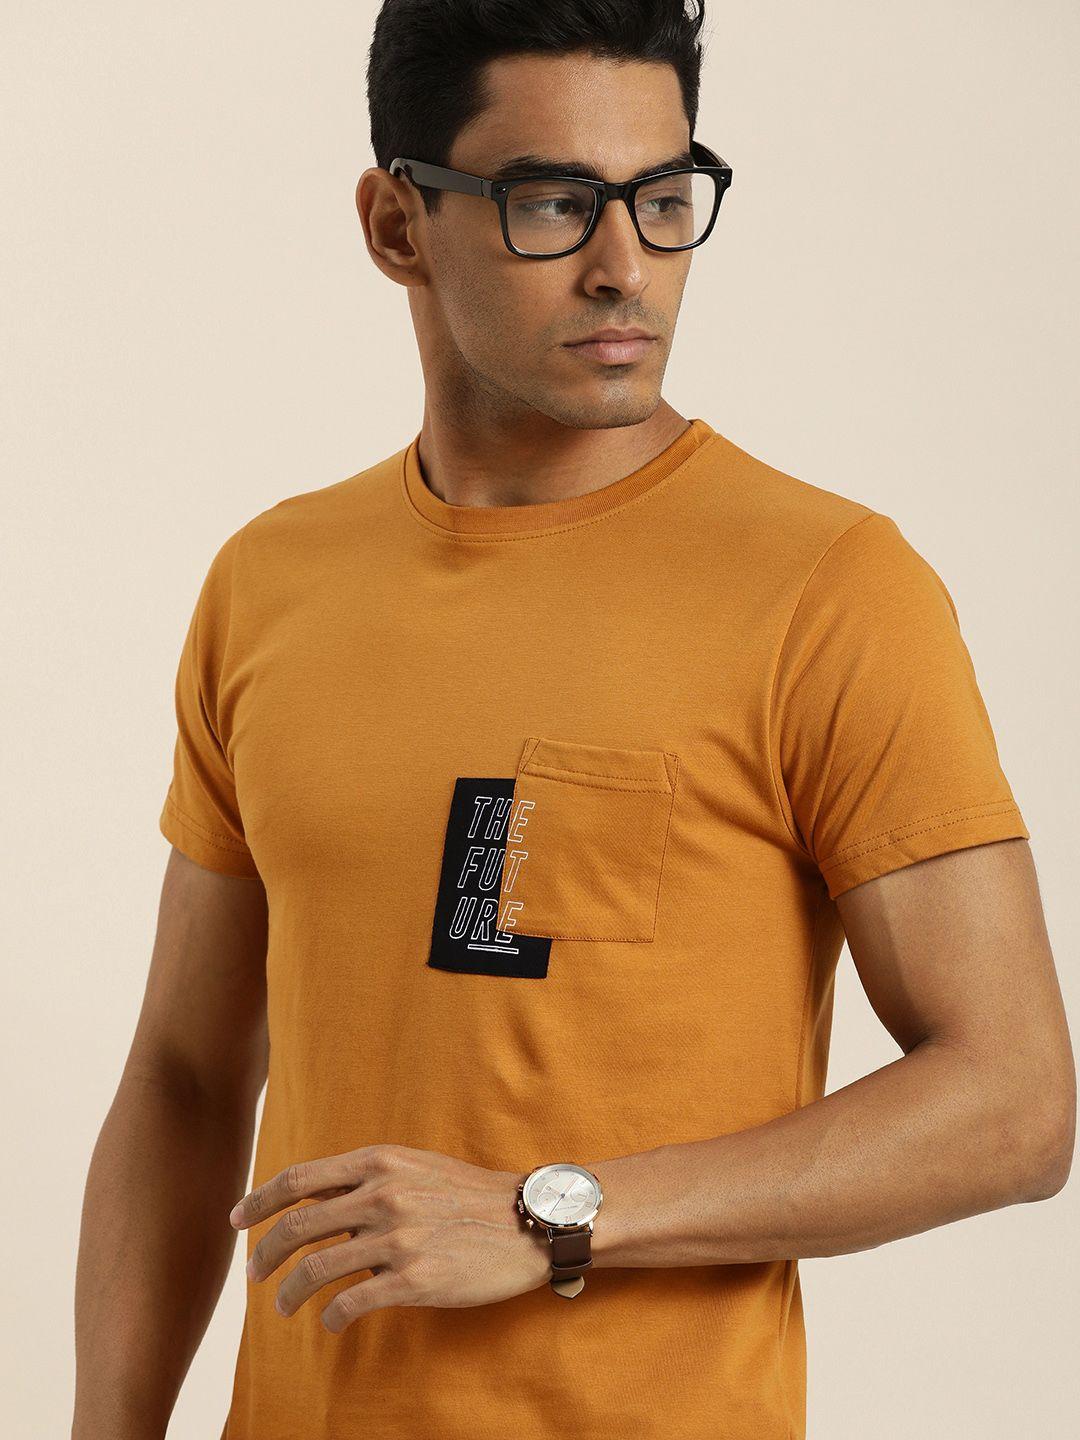 difference-of-opinion-men-brown-cotton-colourblocked-pure-cotton-t-shirt